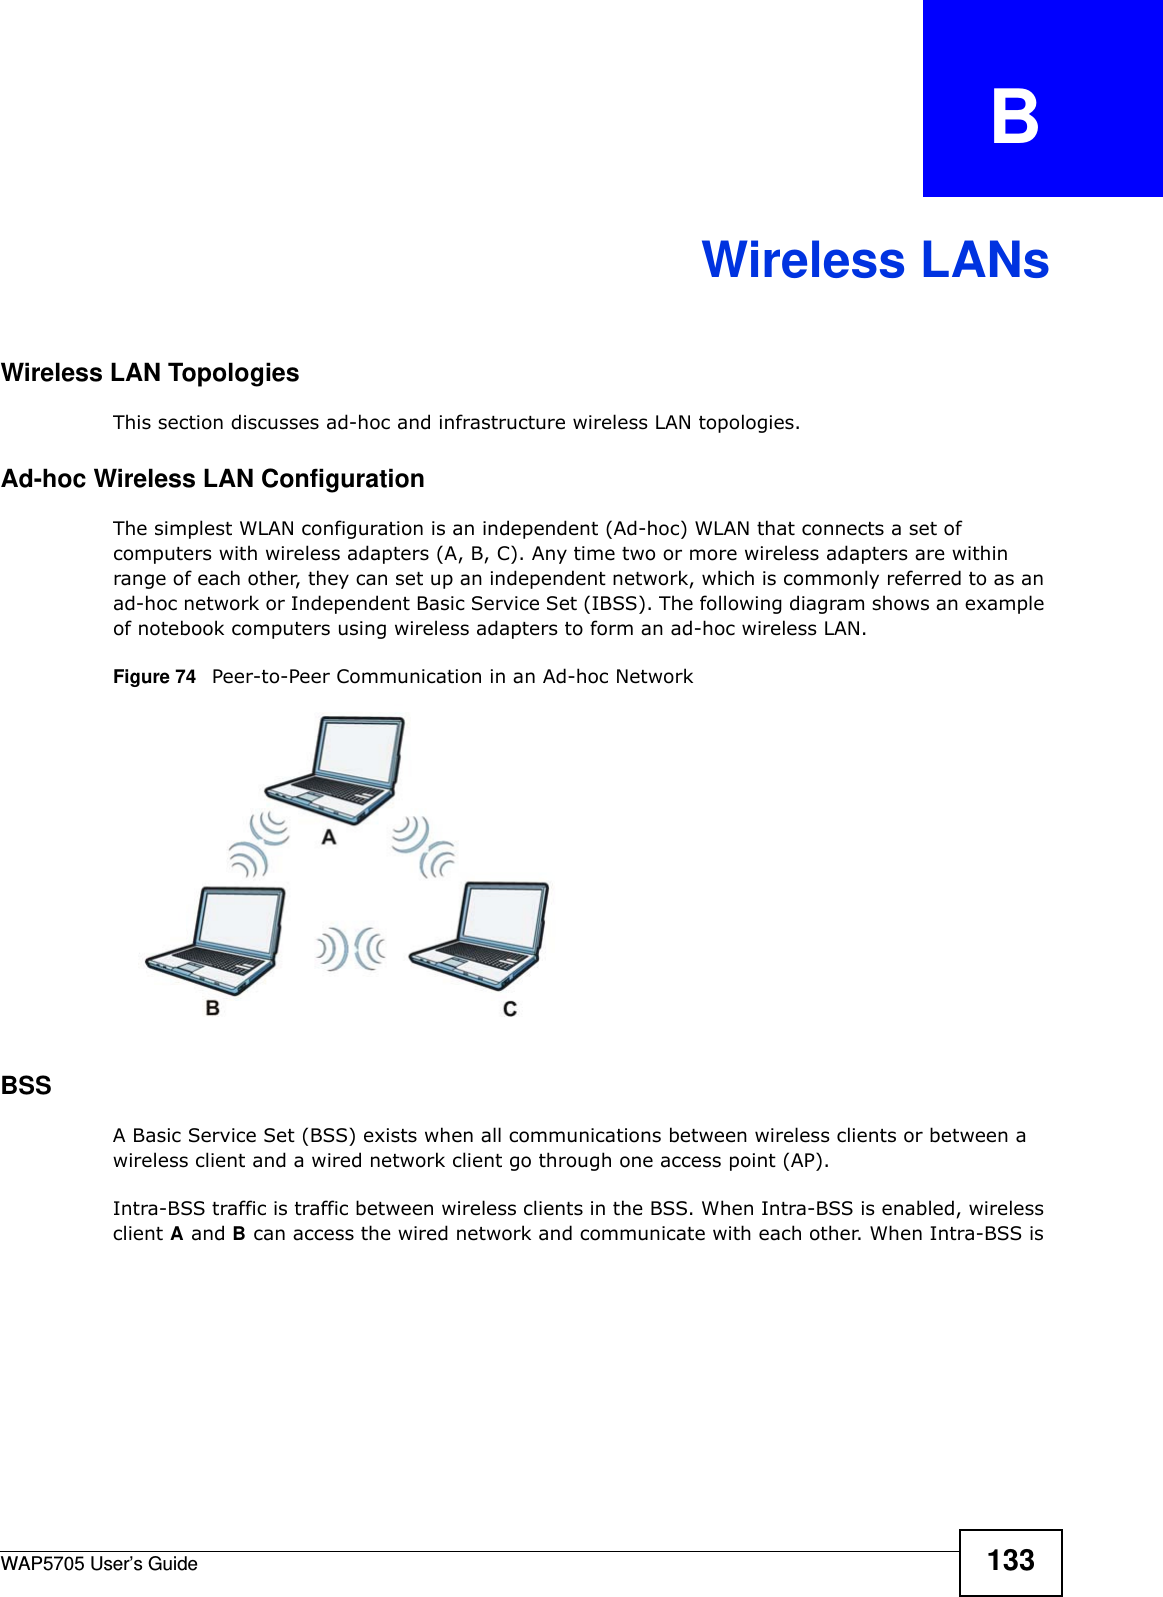 WAP5705 User’s Guide 133APPENDIX   BWireless LANsWireless LAN TopologiesThis section discusses ad-hoc and infrastructure wireless LAN topologies.Ad-hoc Wireless LAN ConfigurationThe simplest WLAN configuration is an independent (Ad-hoc) WLAN that connects a set of computers with wireless adapters (A, B, C). Any time two or more wireless adapters are within range of each other, they can set up an independent network, which is commonly referred to as an ad-hoc network or Independent Basic Service Set (IBSS). The following diagram shows an example of notebook computers using wireless adapters to form an ad-hoc wireless LAN. Figure 74   Peer-to-Peer Communication in an Ad-hoc NetworkBSSA Basic Service Set (BSS) exists when all communications between wireless clients or between a wireless client and a wired network client go through one access point (AP). Intra-BSS traffic is traffic between wireless clients in the BSS. When Intra-BSS is enabled, wireless client A and B can access the wired network and communicate with each other. When Intra-BSS is 